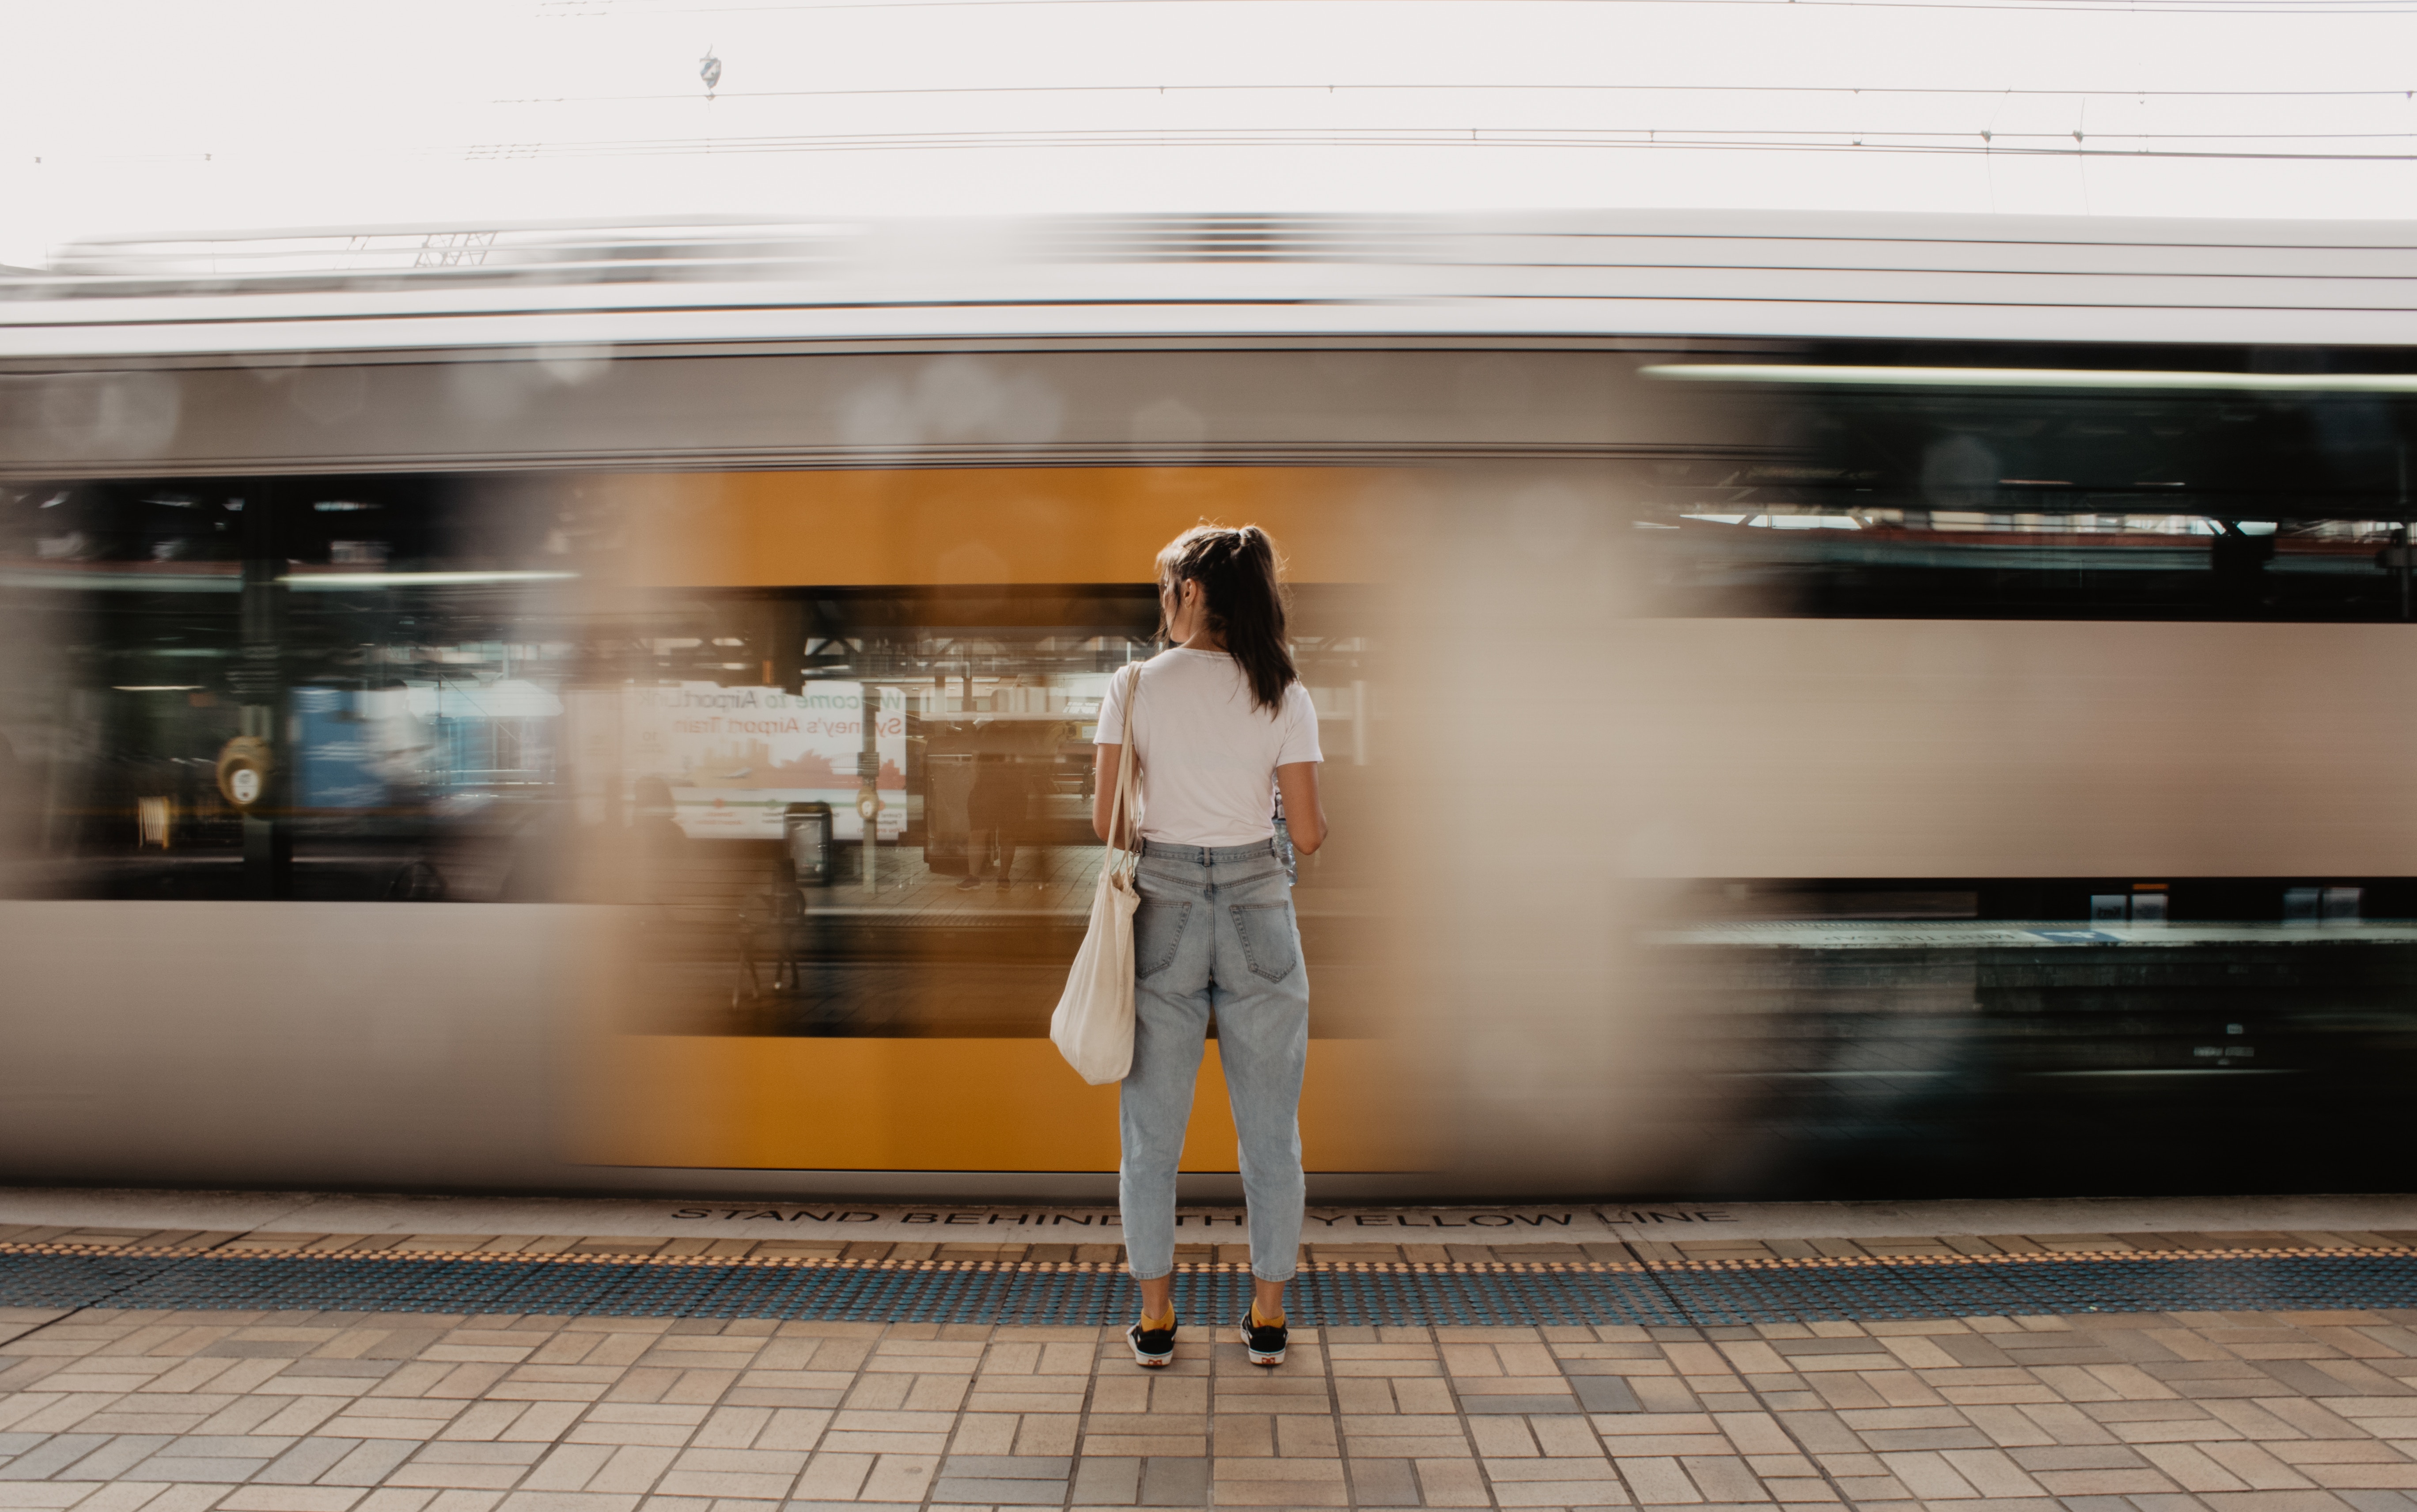 When you travel solo in Japan using transportation is easy